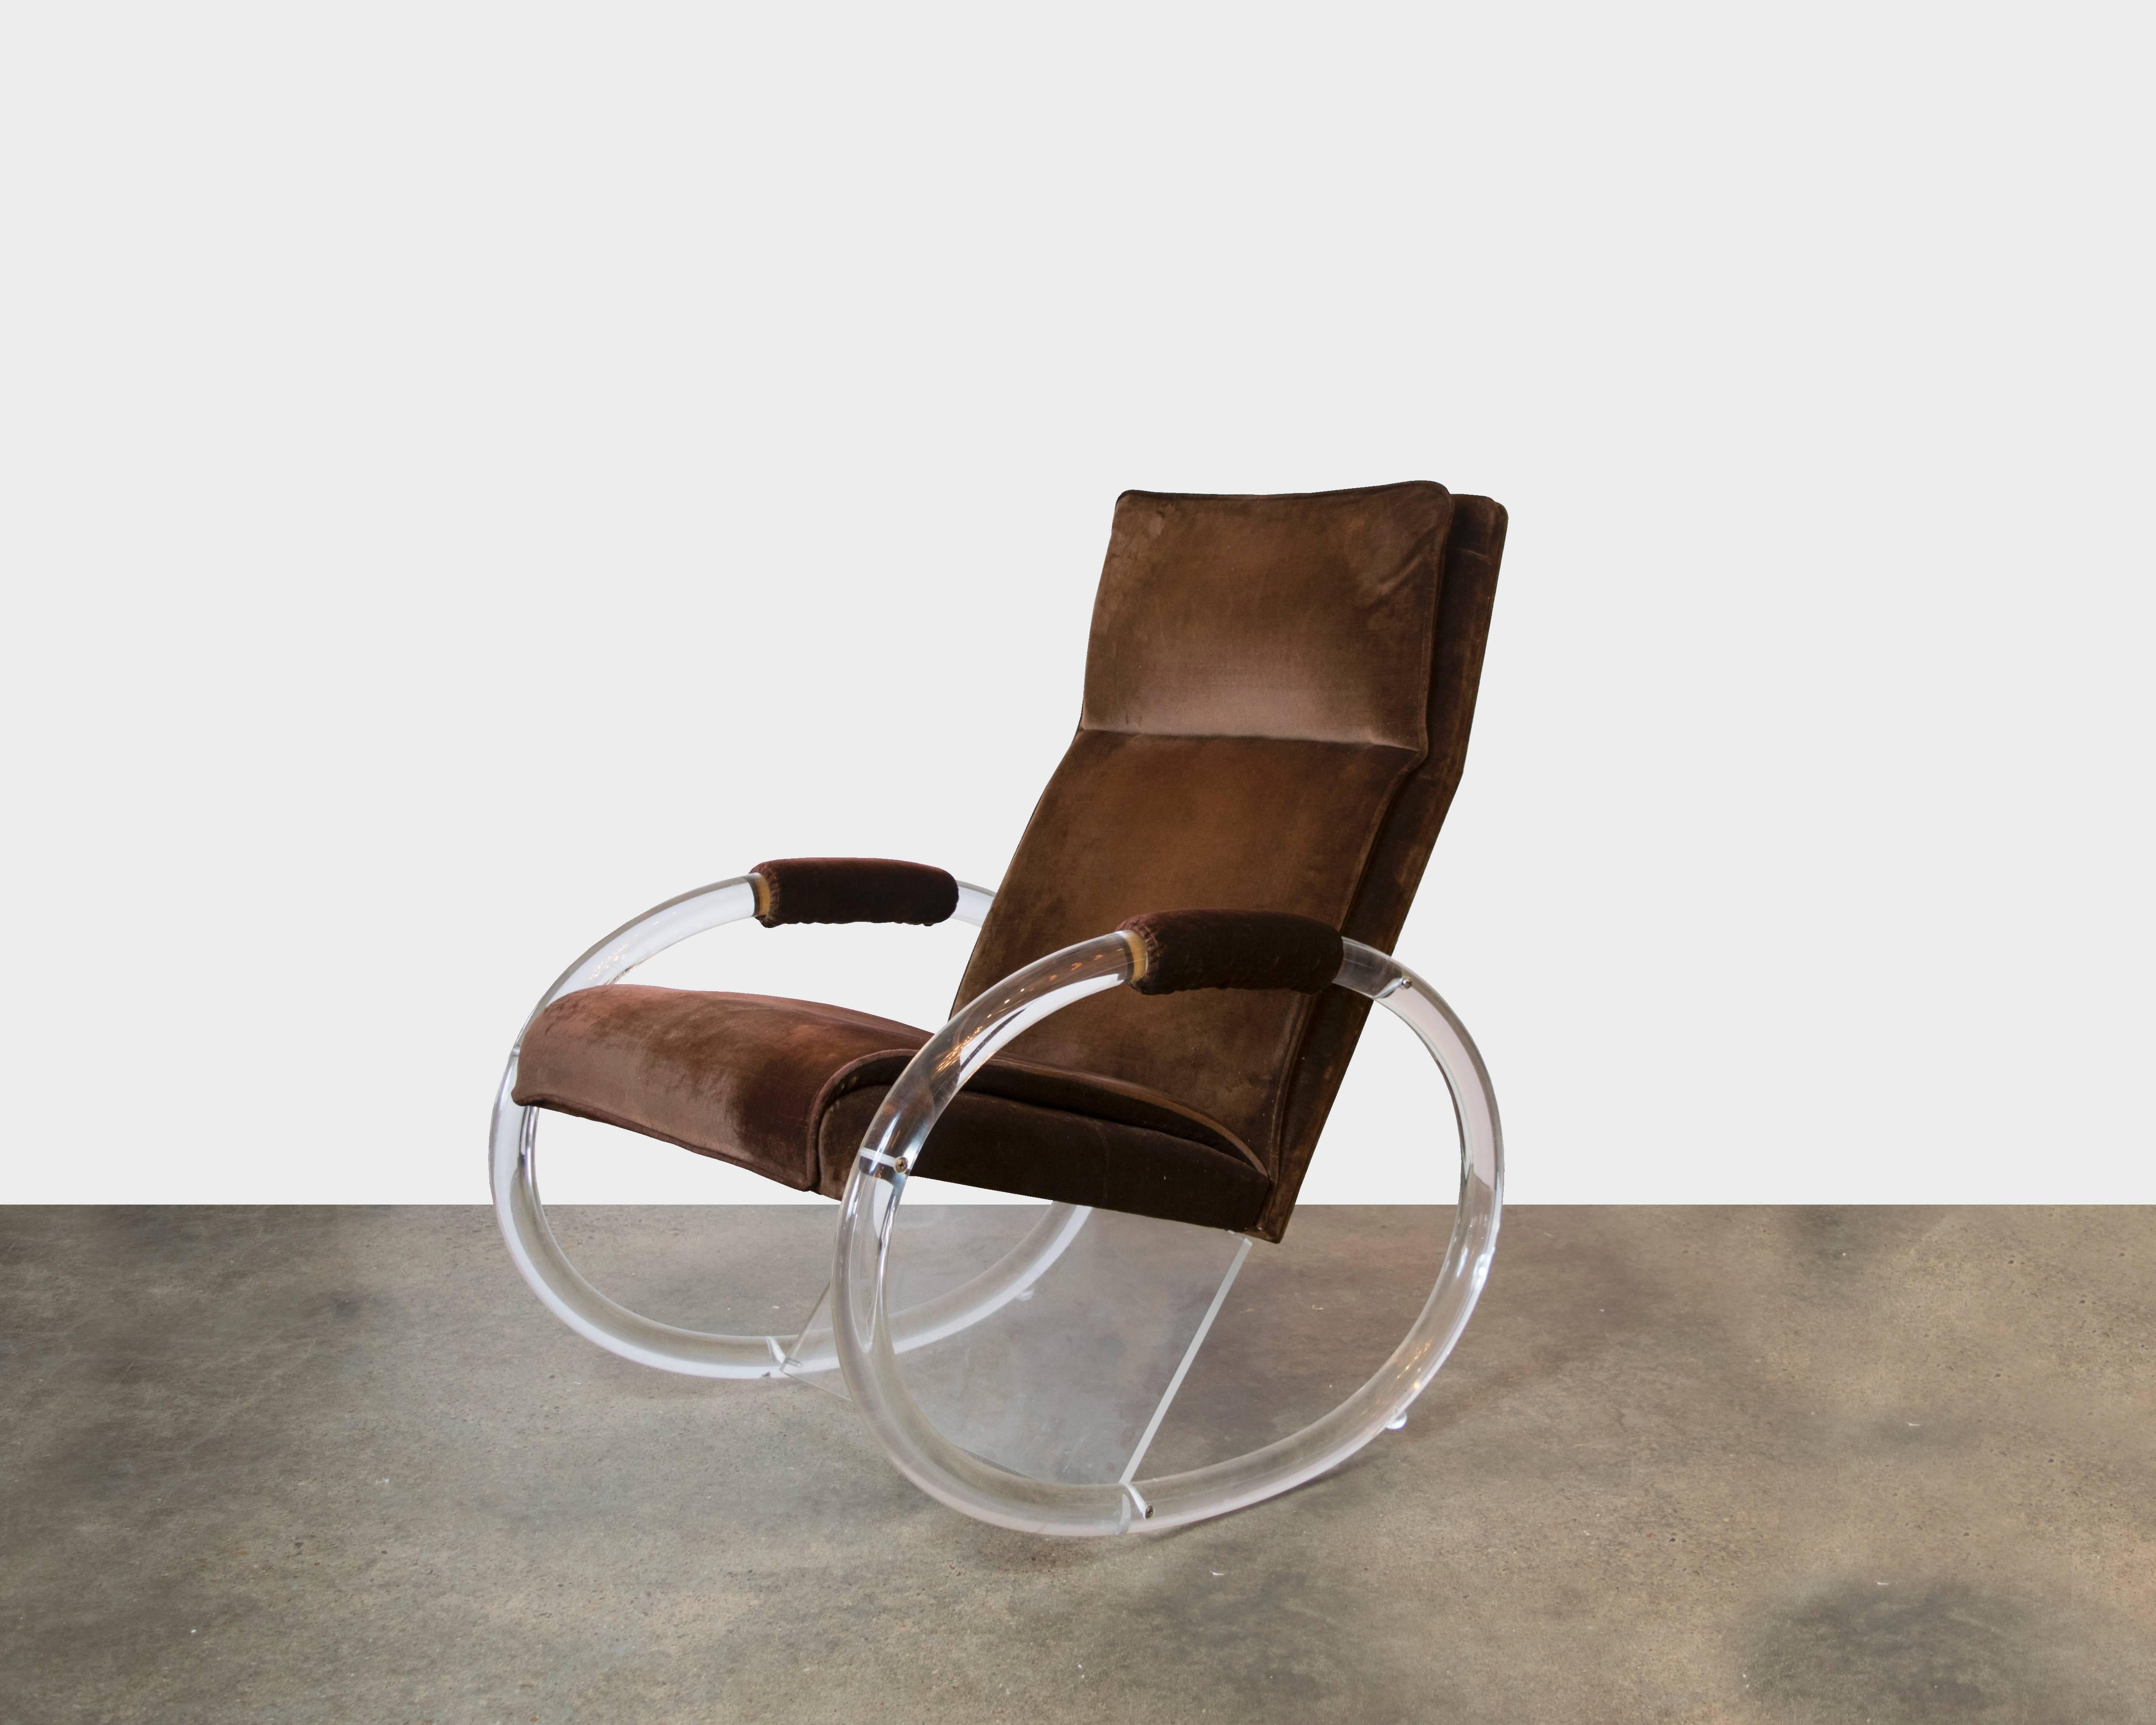 This Lucite rocker by Charles Hollis Jones is perhaps the most fabulous rocker ever made. It sits comfortably and yet is a glamorous addition to a living room, nursery or sun room. Everyone loves a rocking chair! It has the original upholstery which